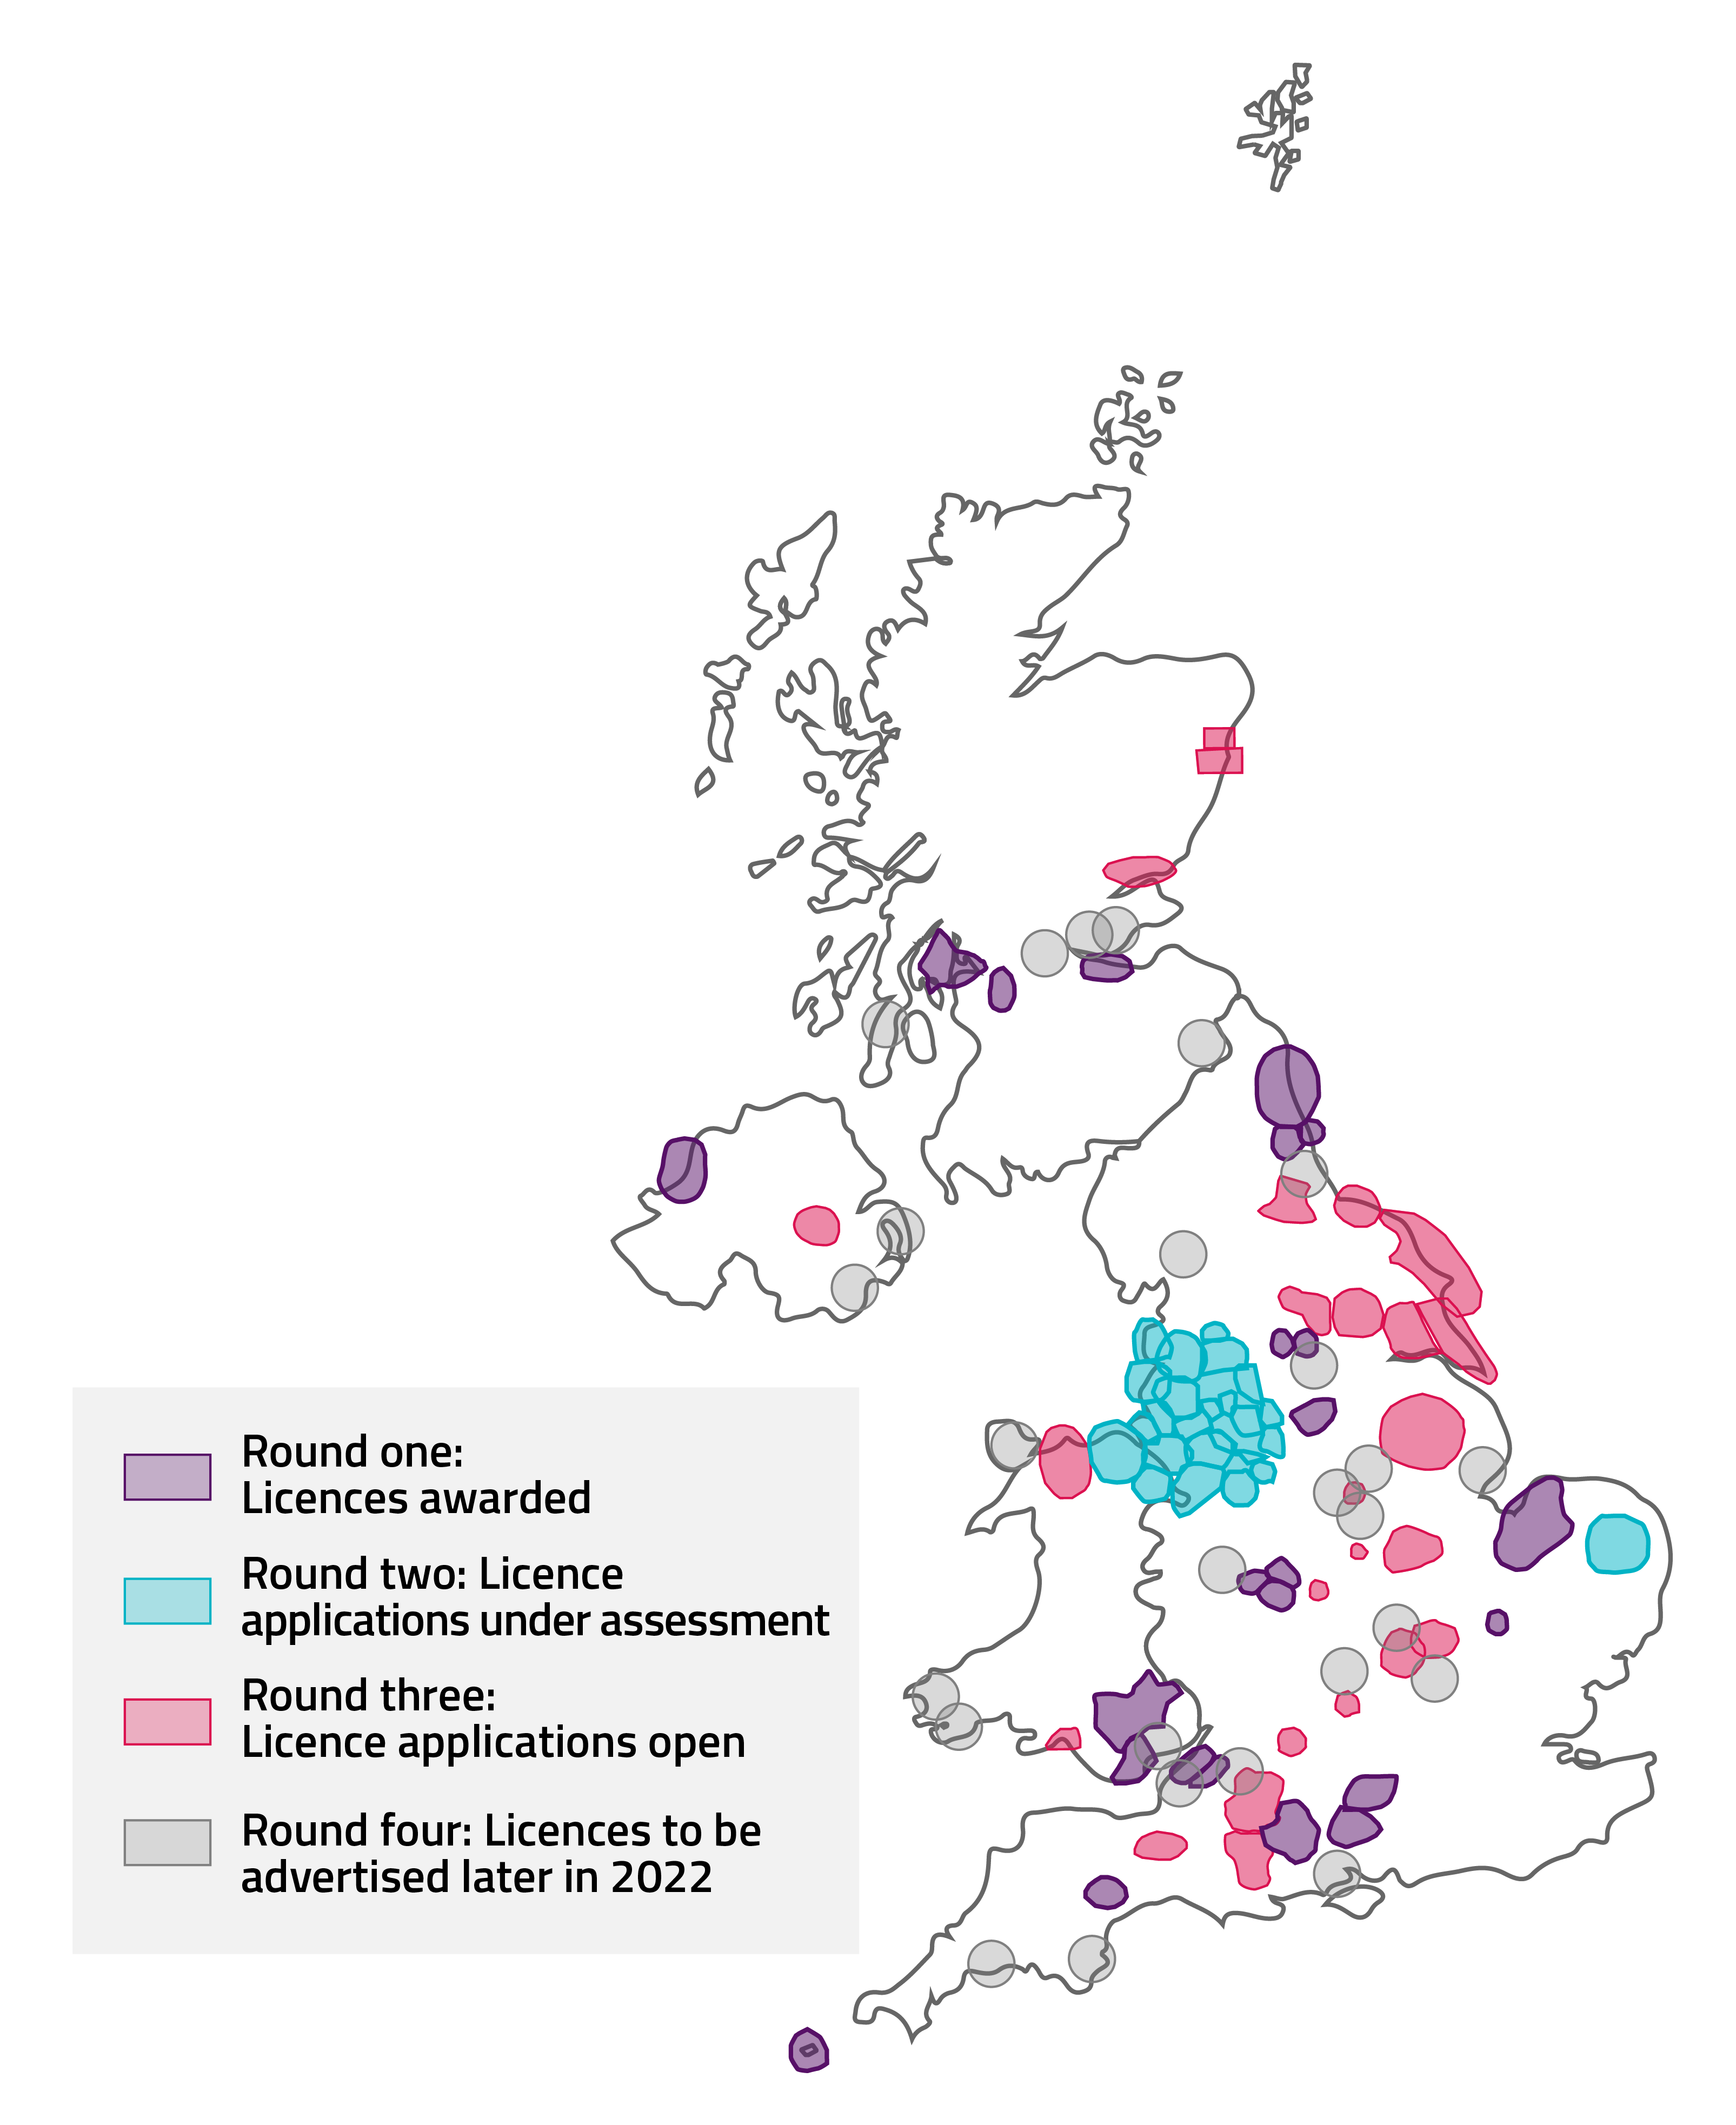 This map of the UK highlights where we have awarded the first round of small-scale multiplex licences, the applications under assessment (round two), licence applications open (round three) and the licences to be advertised later in 2022 (round four).